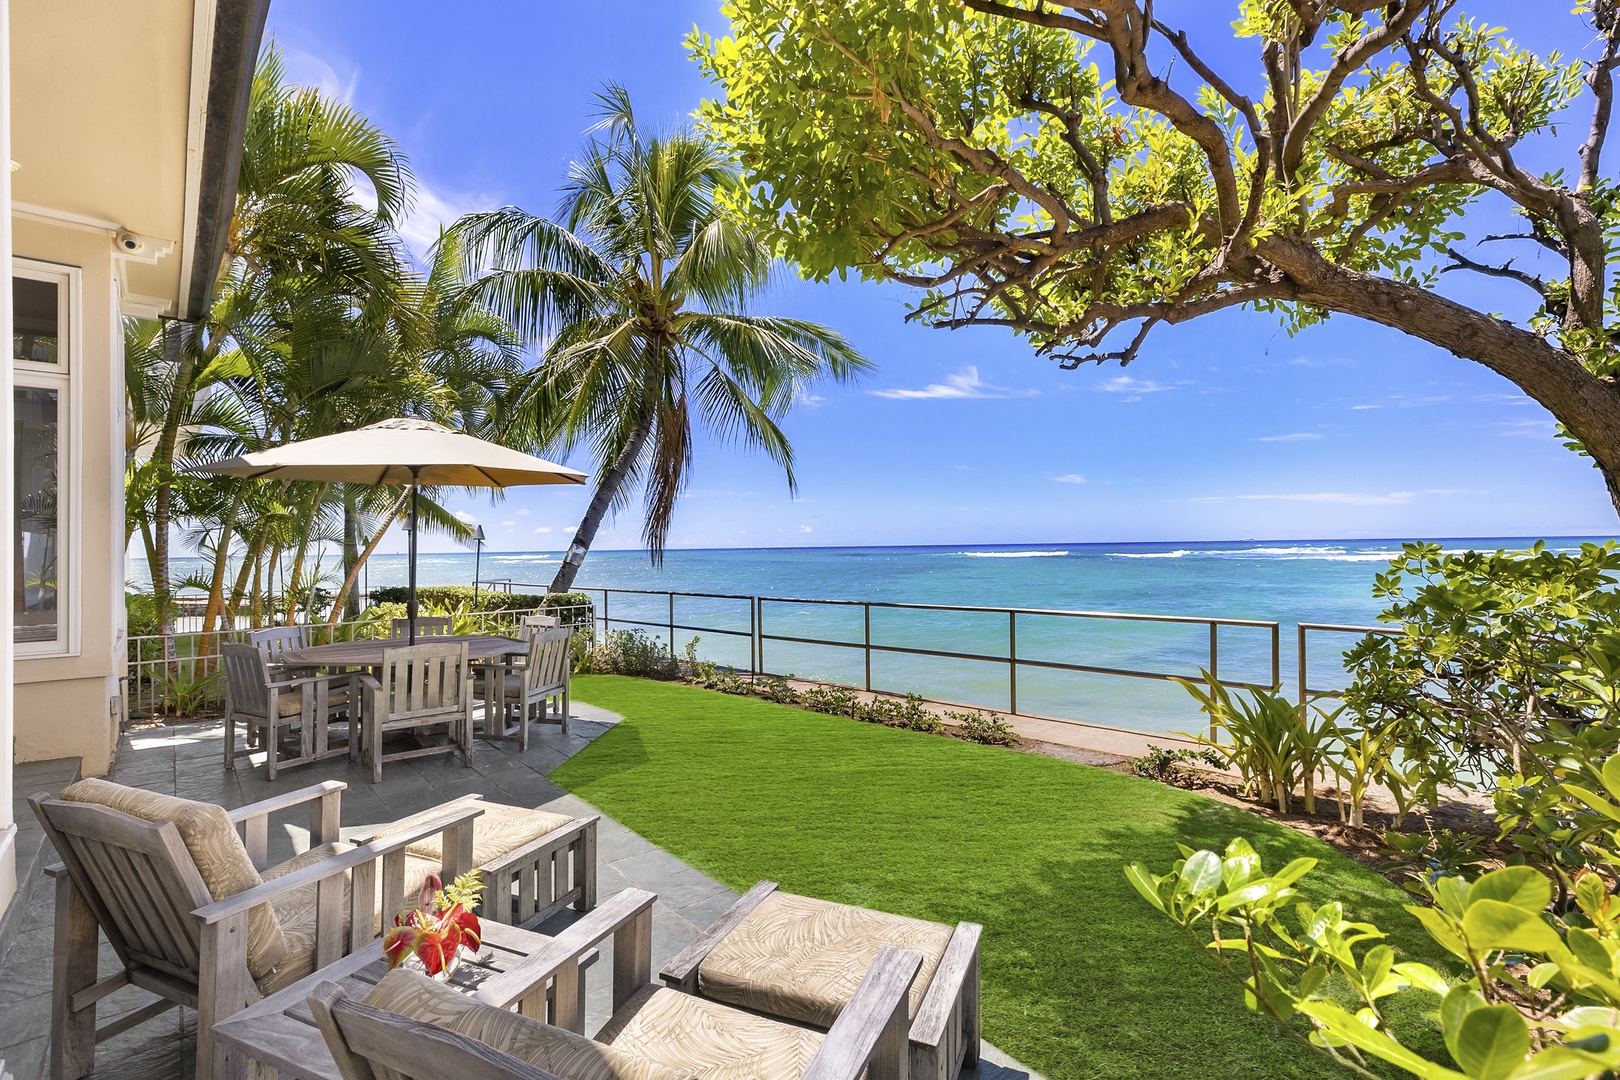 Honolulu Vacation Rentals, Diamond Head Surf House - Oceanside lanai offers both lounge and table seating options.